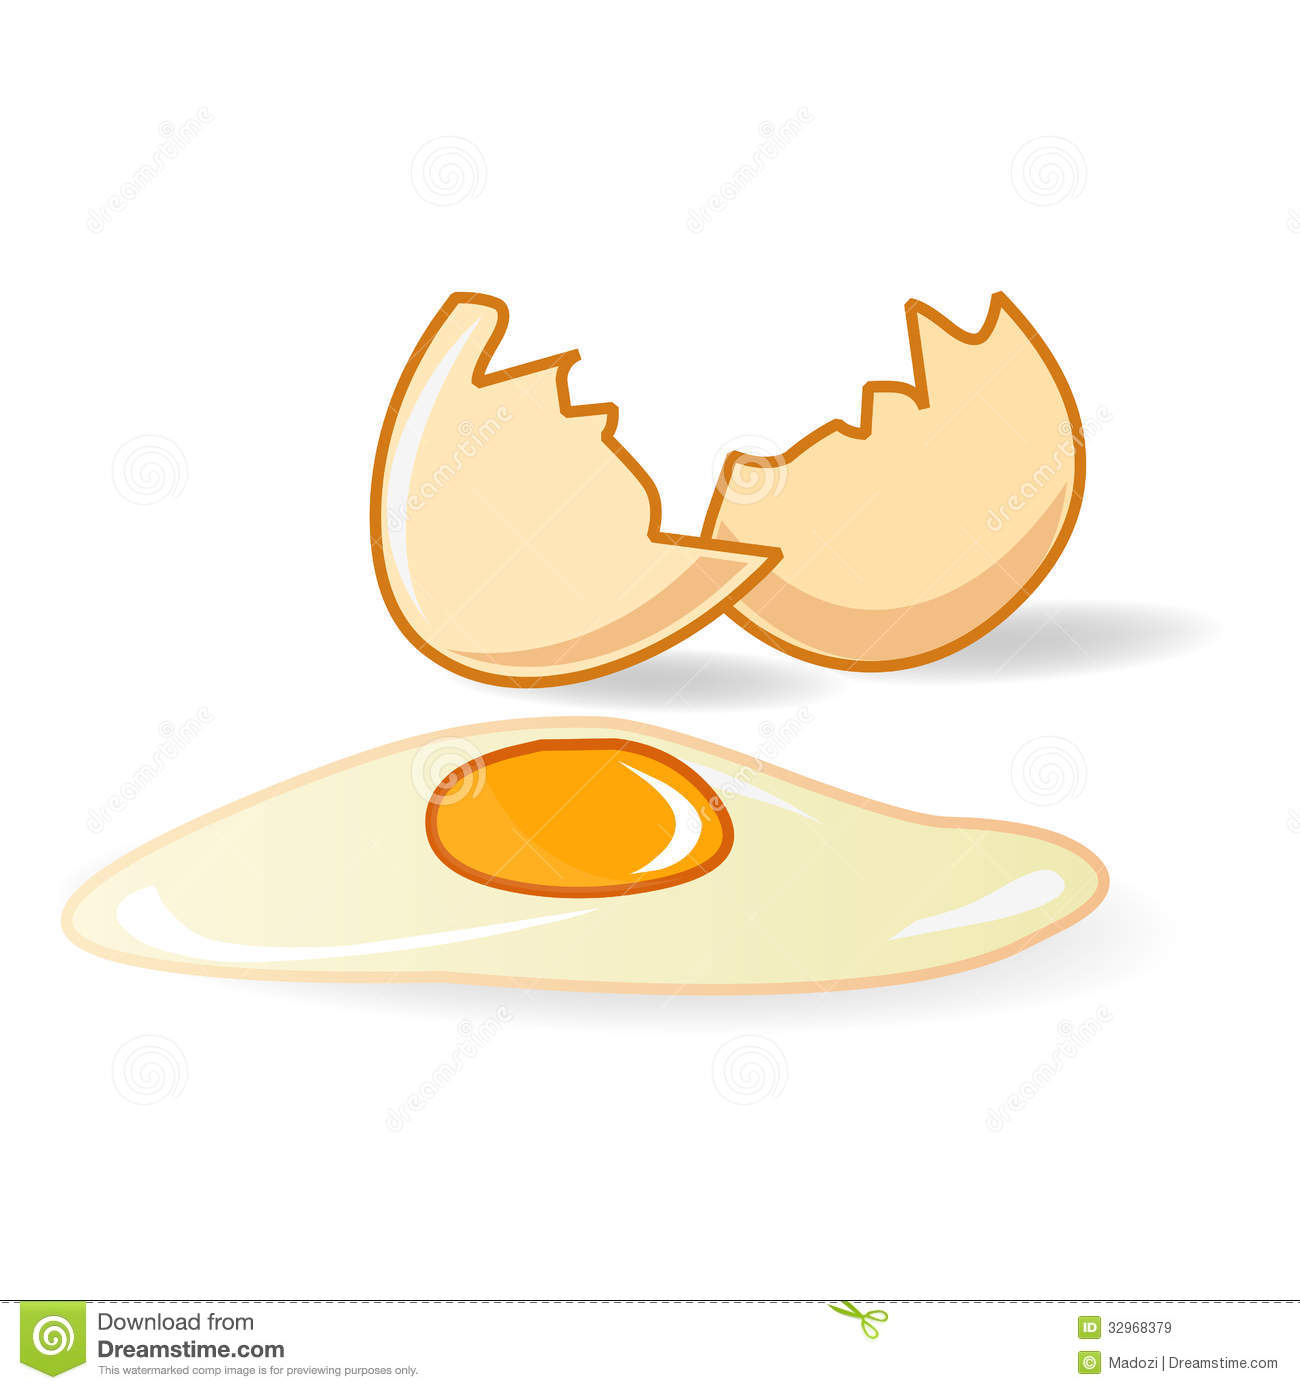 Broken Egg Isolated Illustration Royalty Free Stock Images   Image